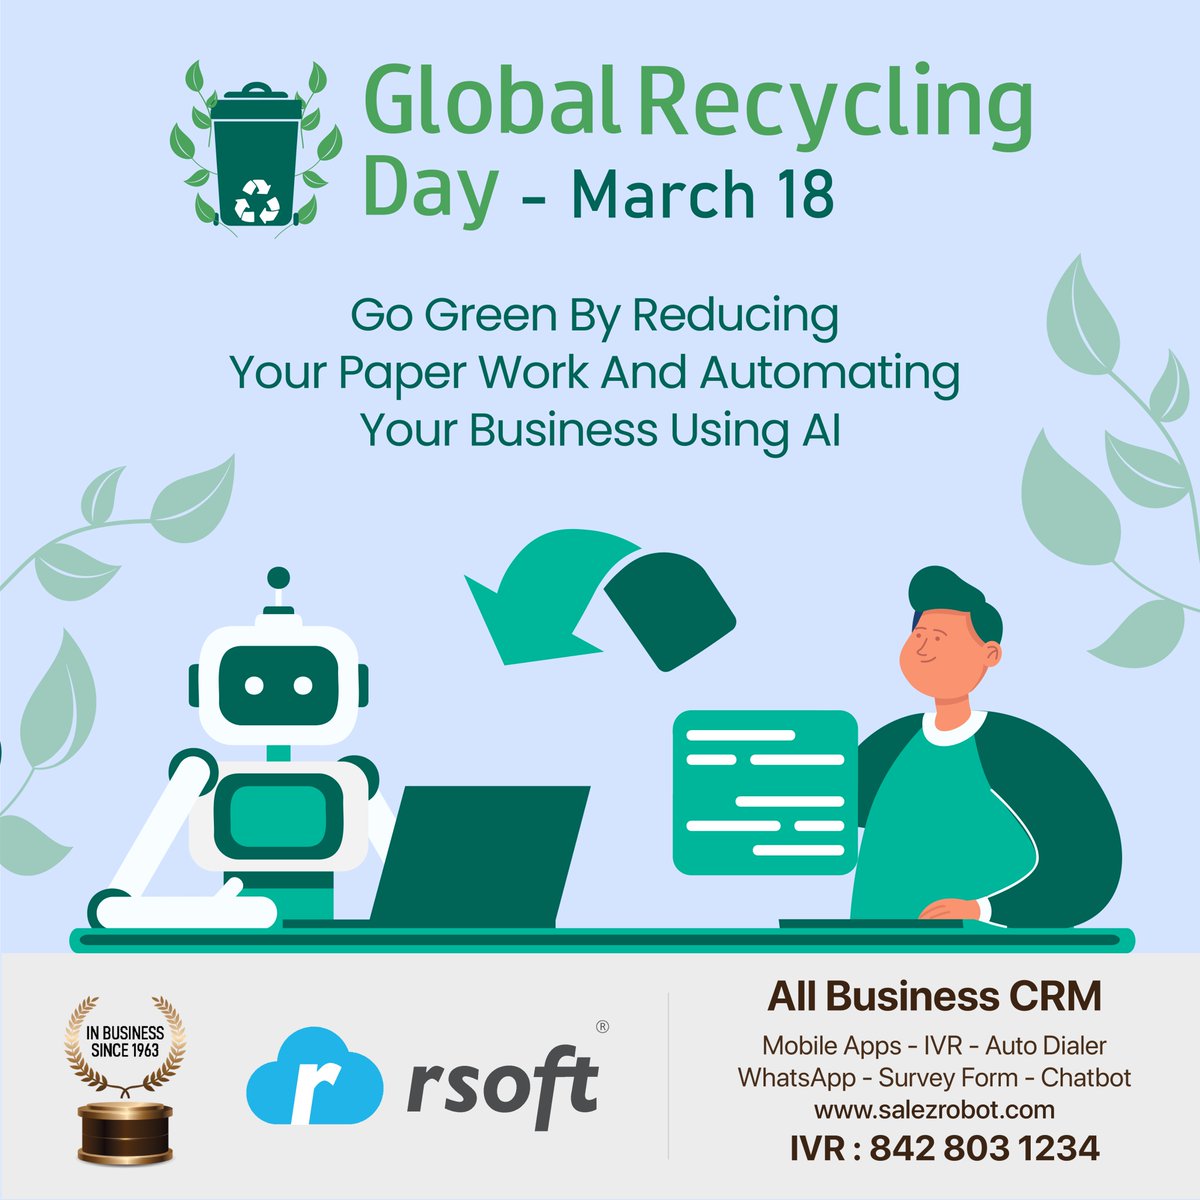 ♻️Global Recycling
Day - March 18🌍

Go Green By Reducing
Your Paper Work And Automating
Your Business Using Al

Signup Your Free Demo Call 842 803 1234 Visit salezrobot.com

#GlobalRecyclingDay #ReduceReuseRecycle
#CRMRevolution #FutureOfCRM #DigitalTransformation